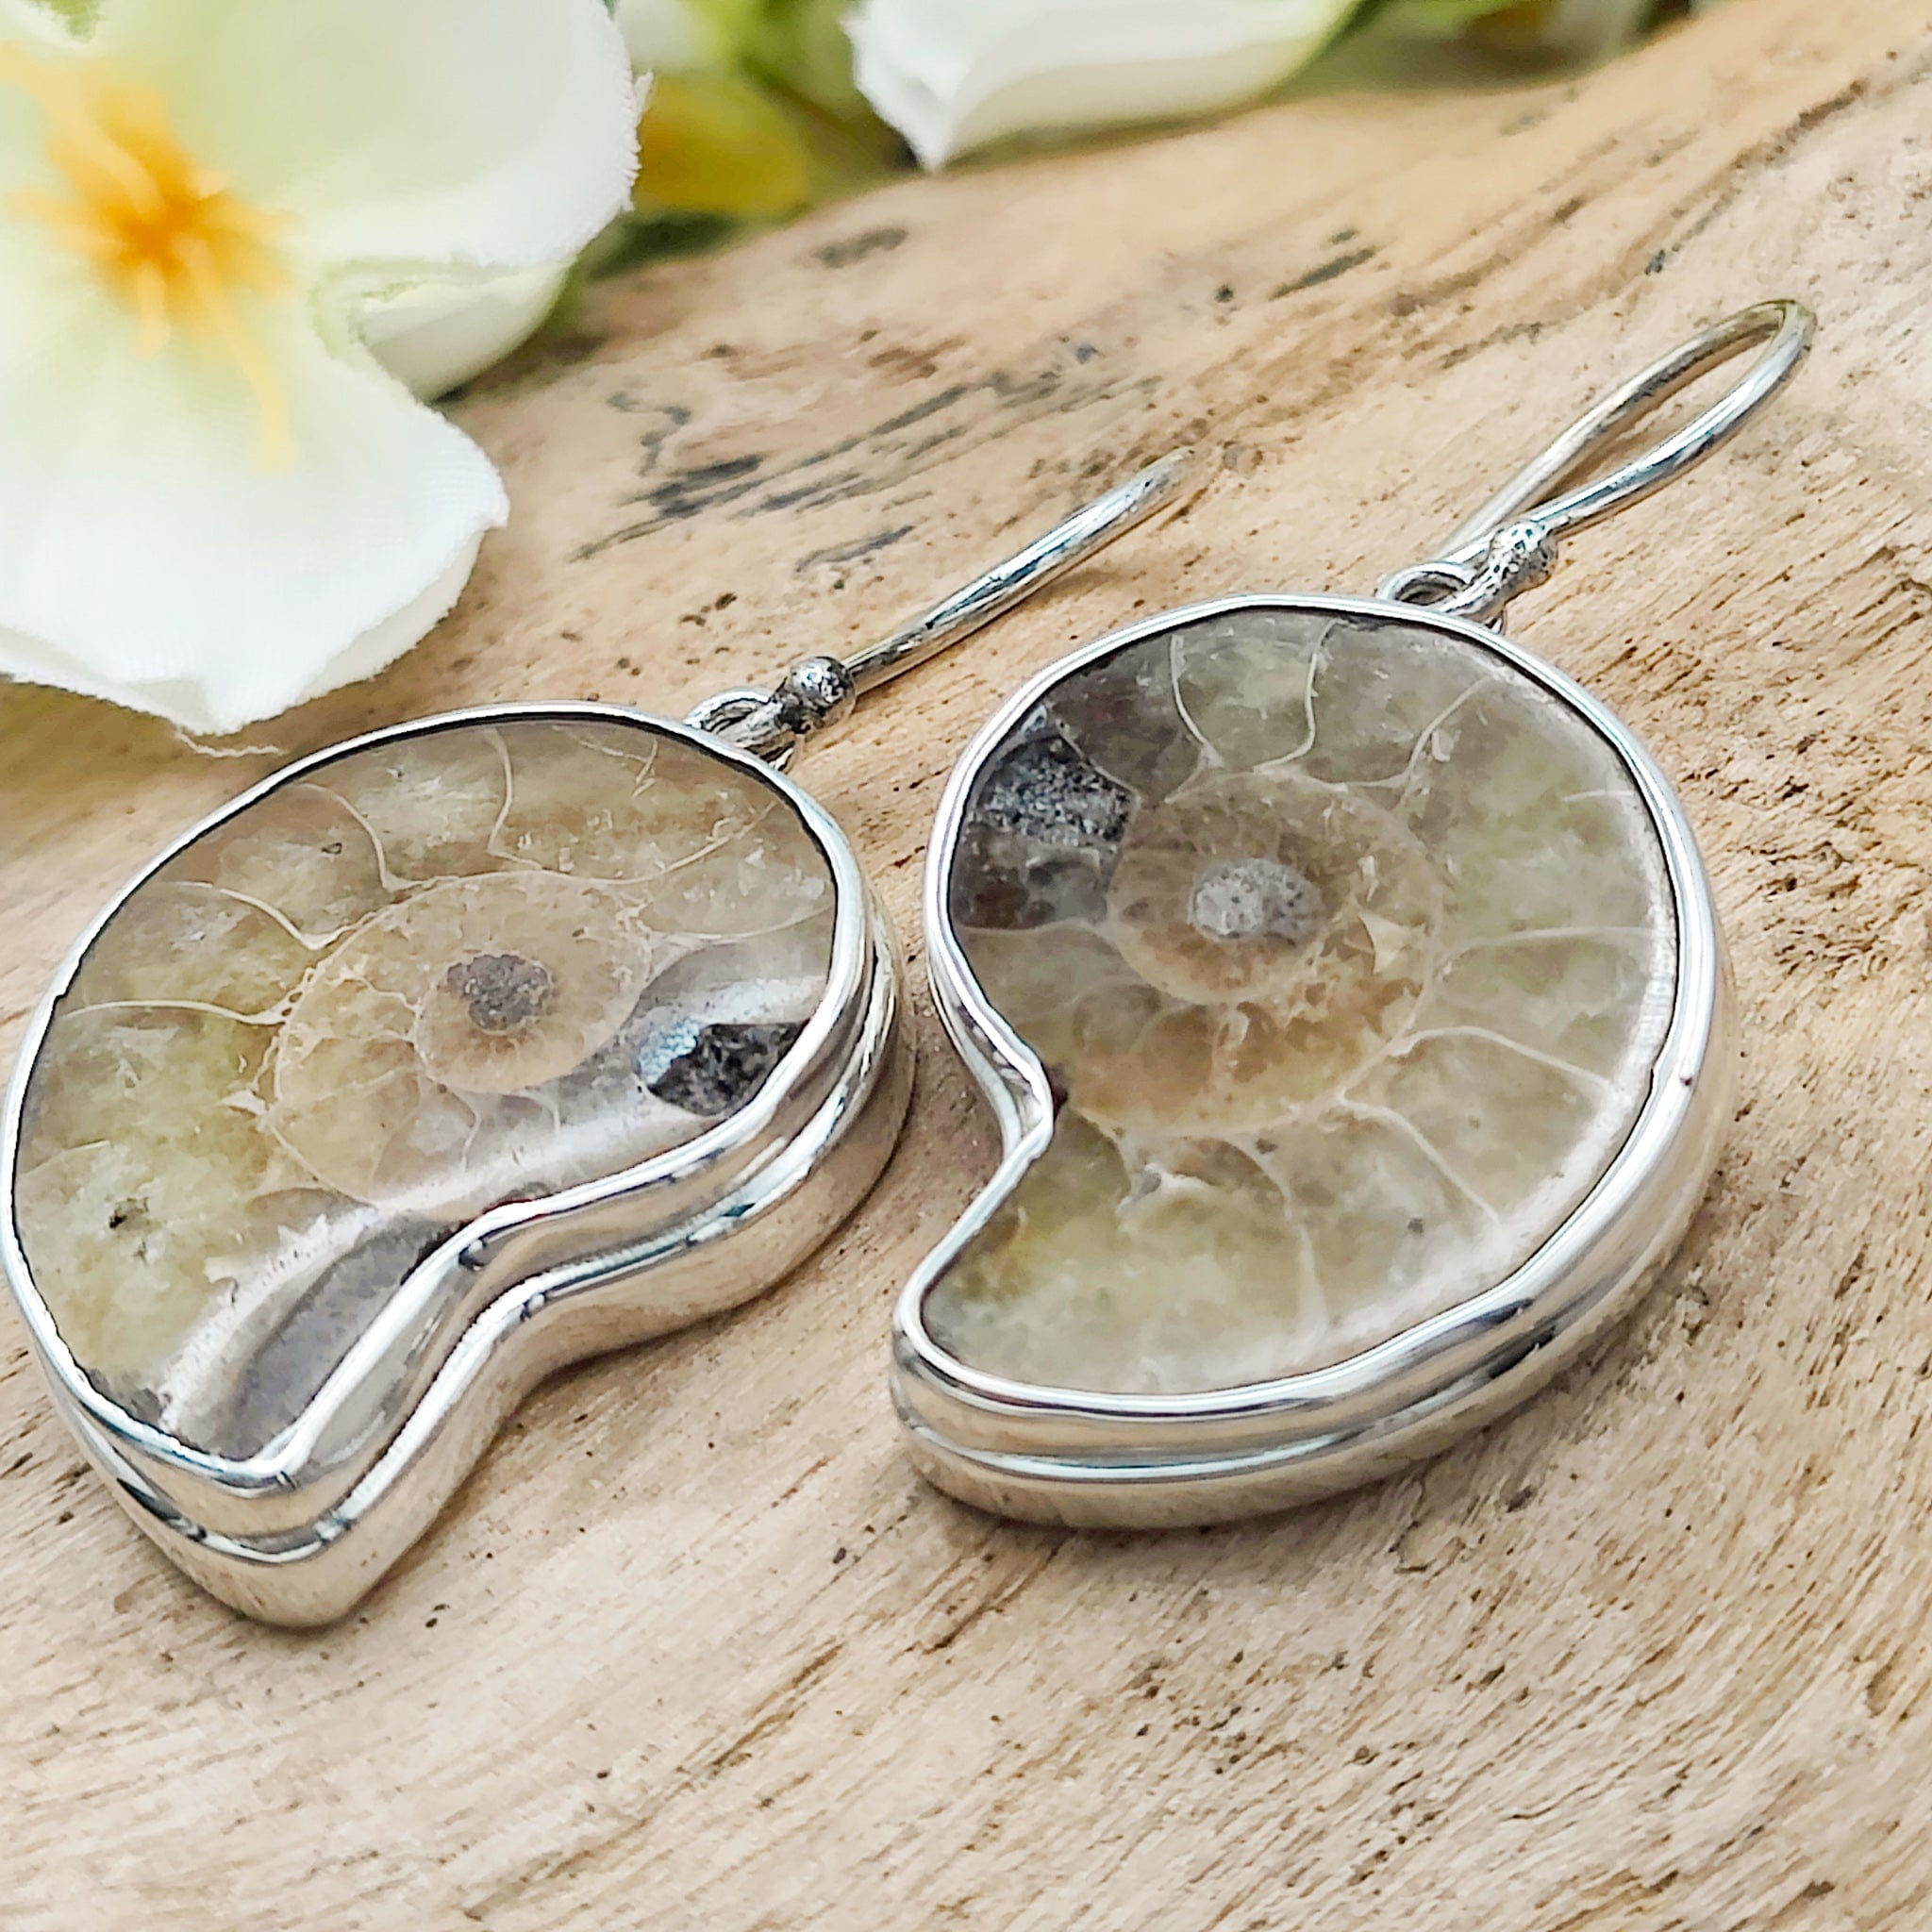 Hepburn and Hughes Ammonite 24mm Earrings | Madagascan Fossil Jewellery | Sterling Silver